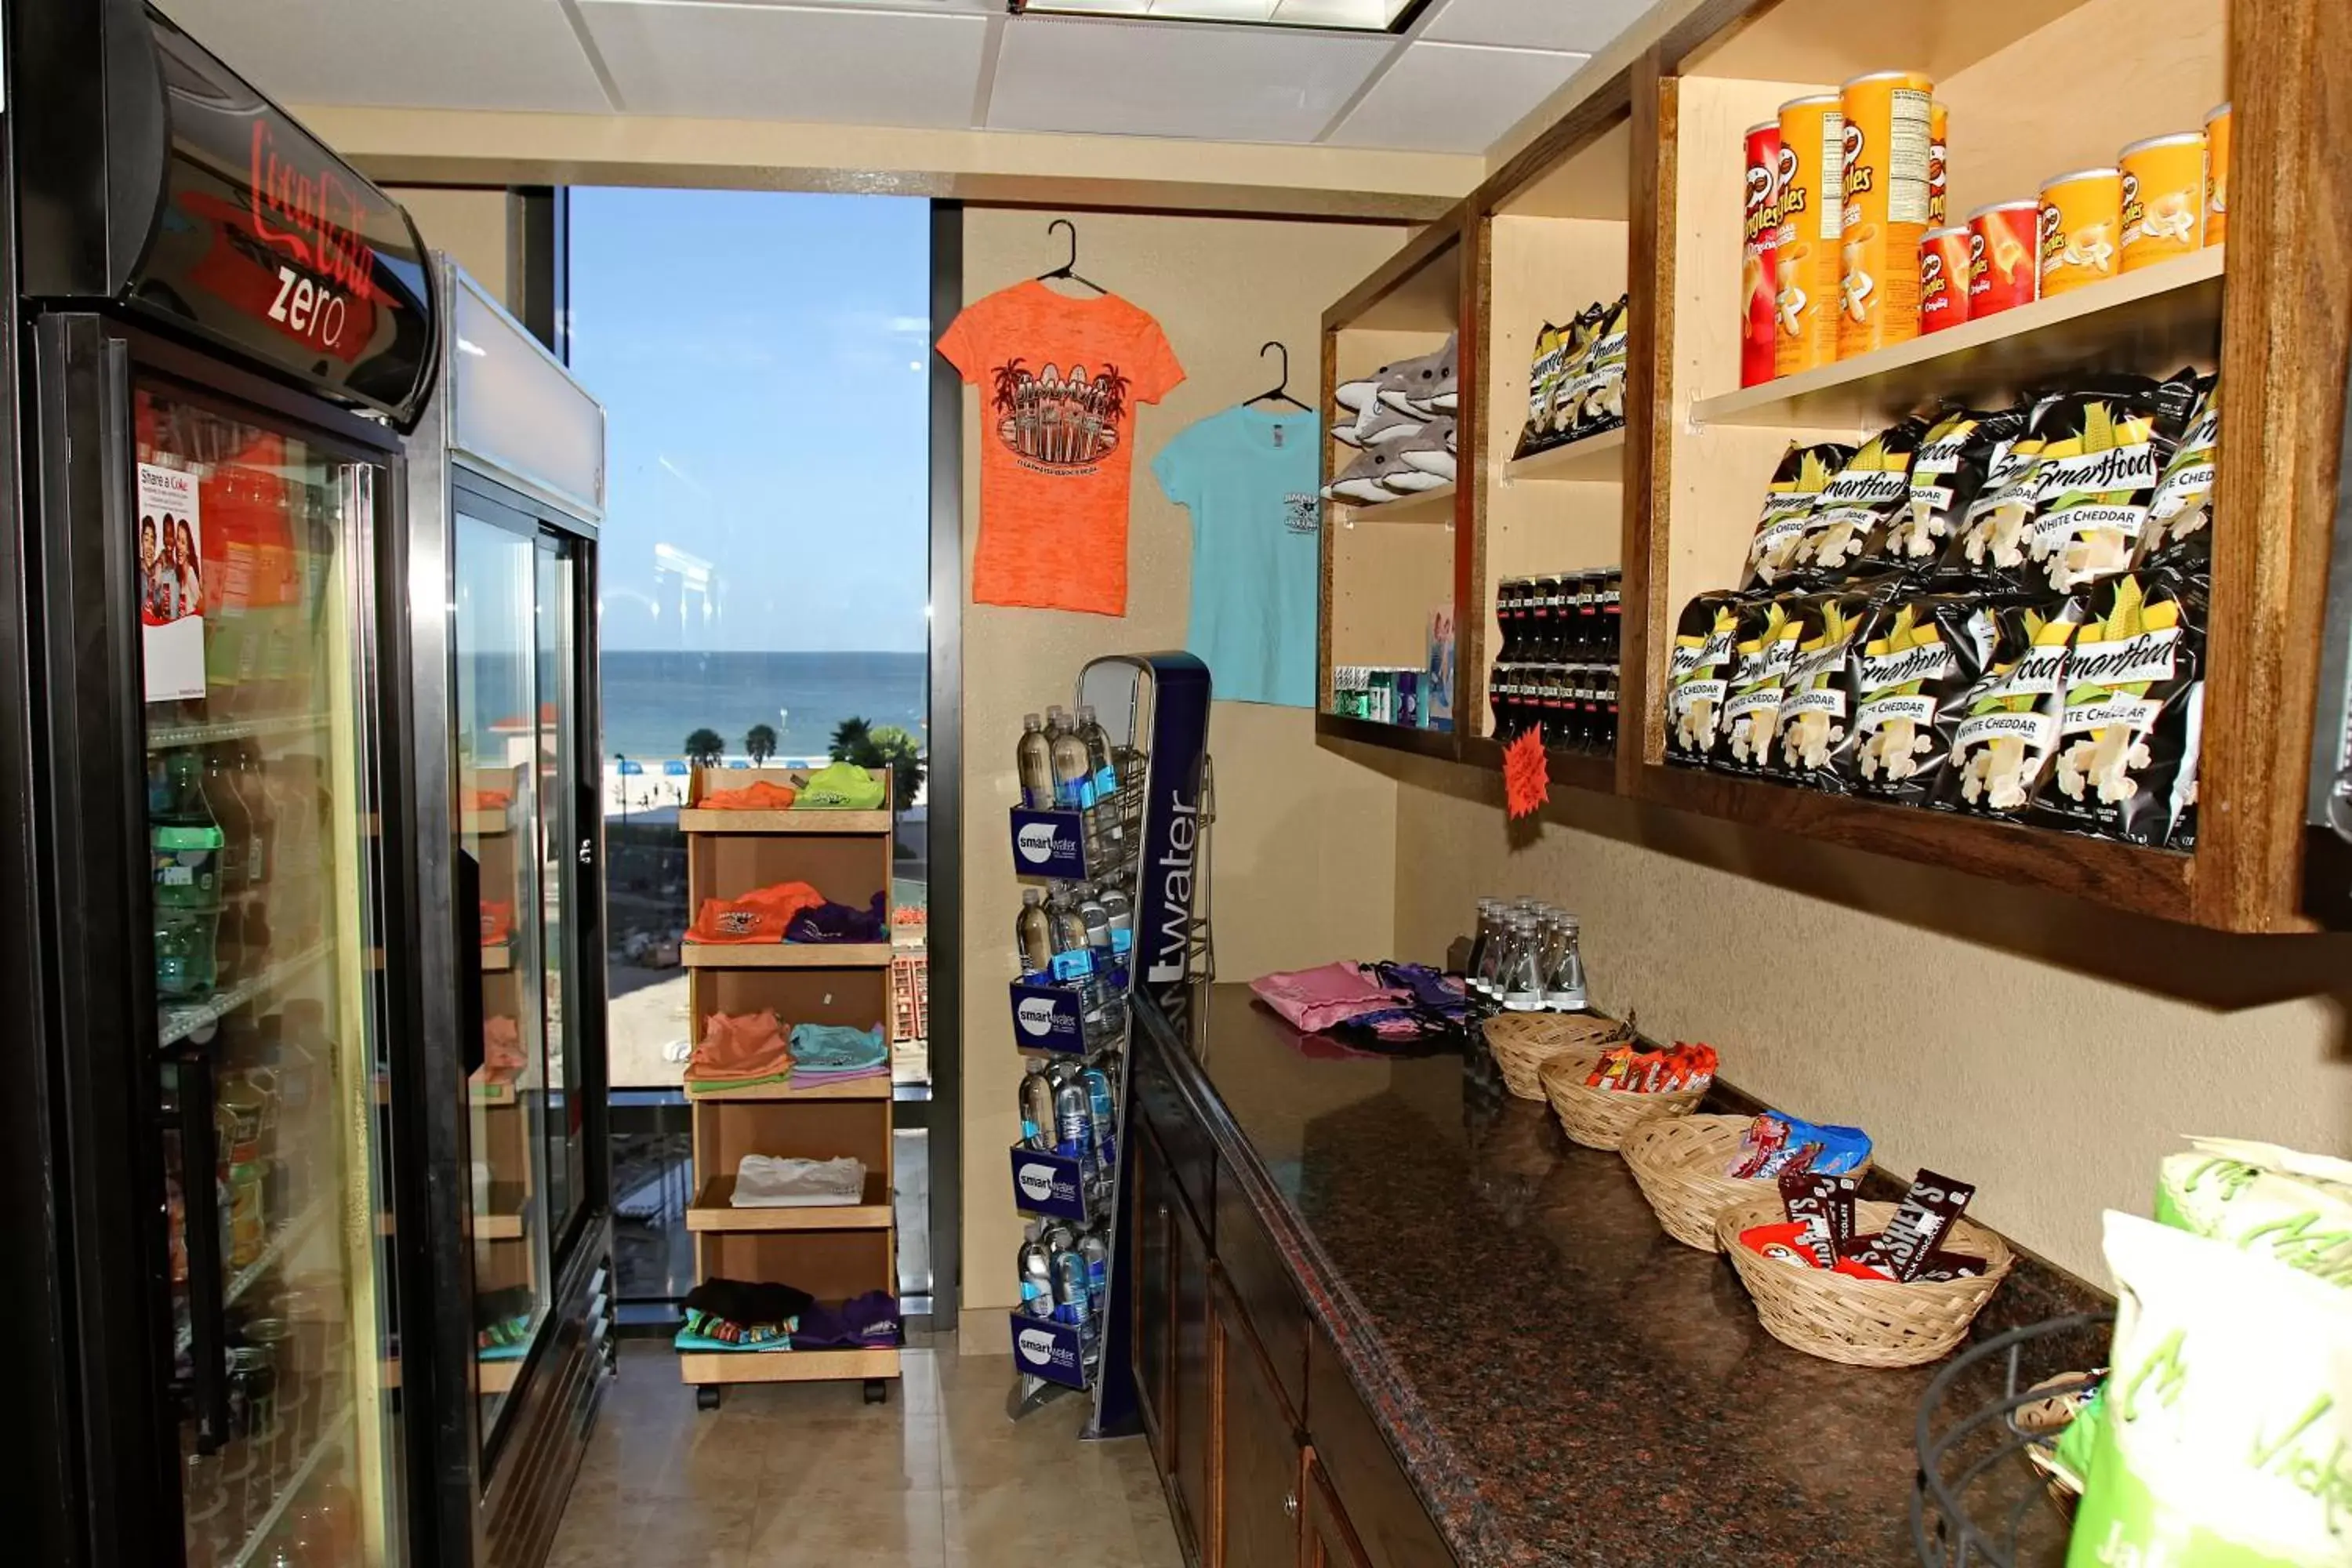 On-site shops, Supermarket/Shops in Pier House 60 Clearwater Beach Marina Hotel